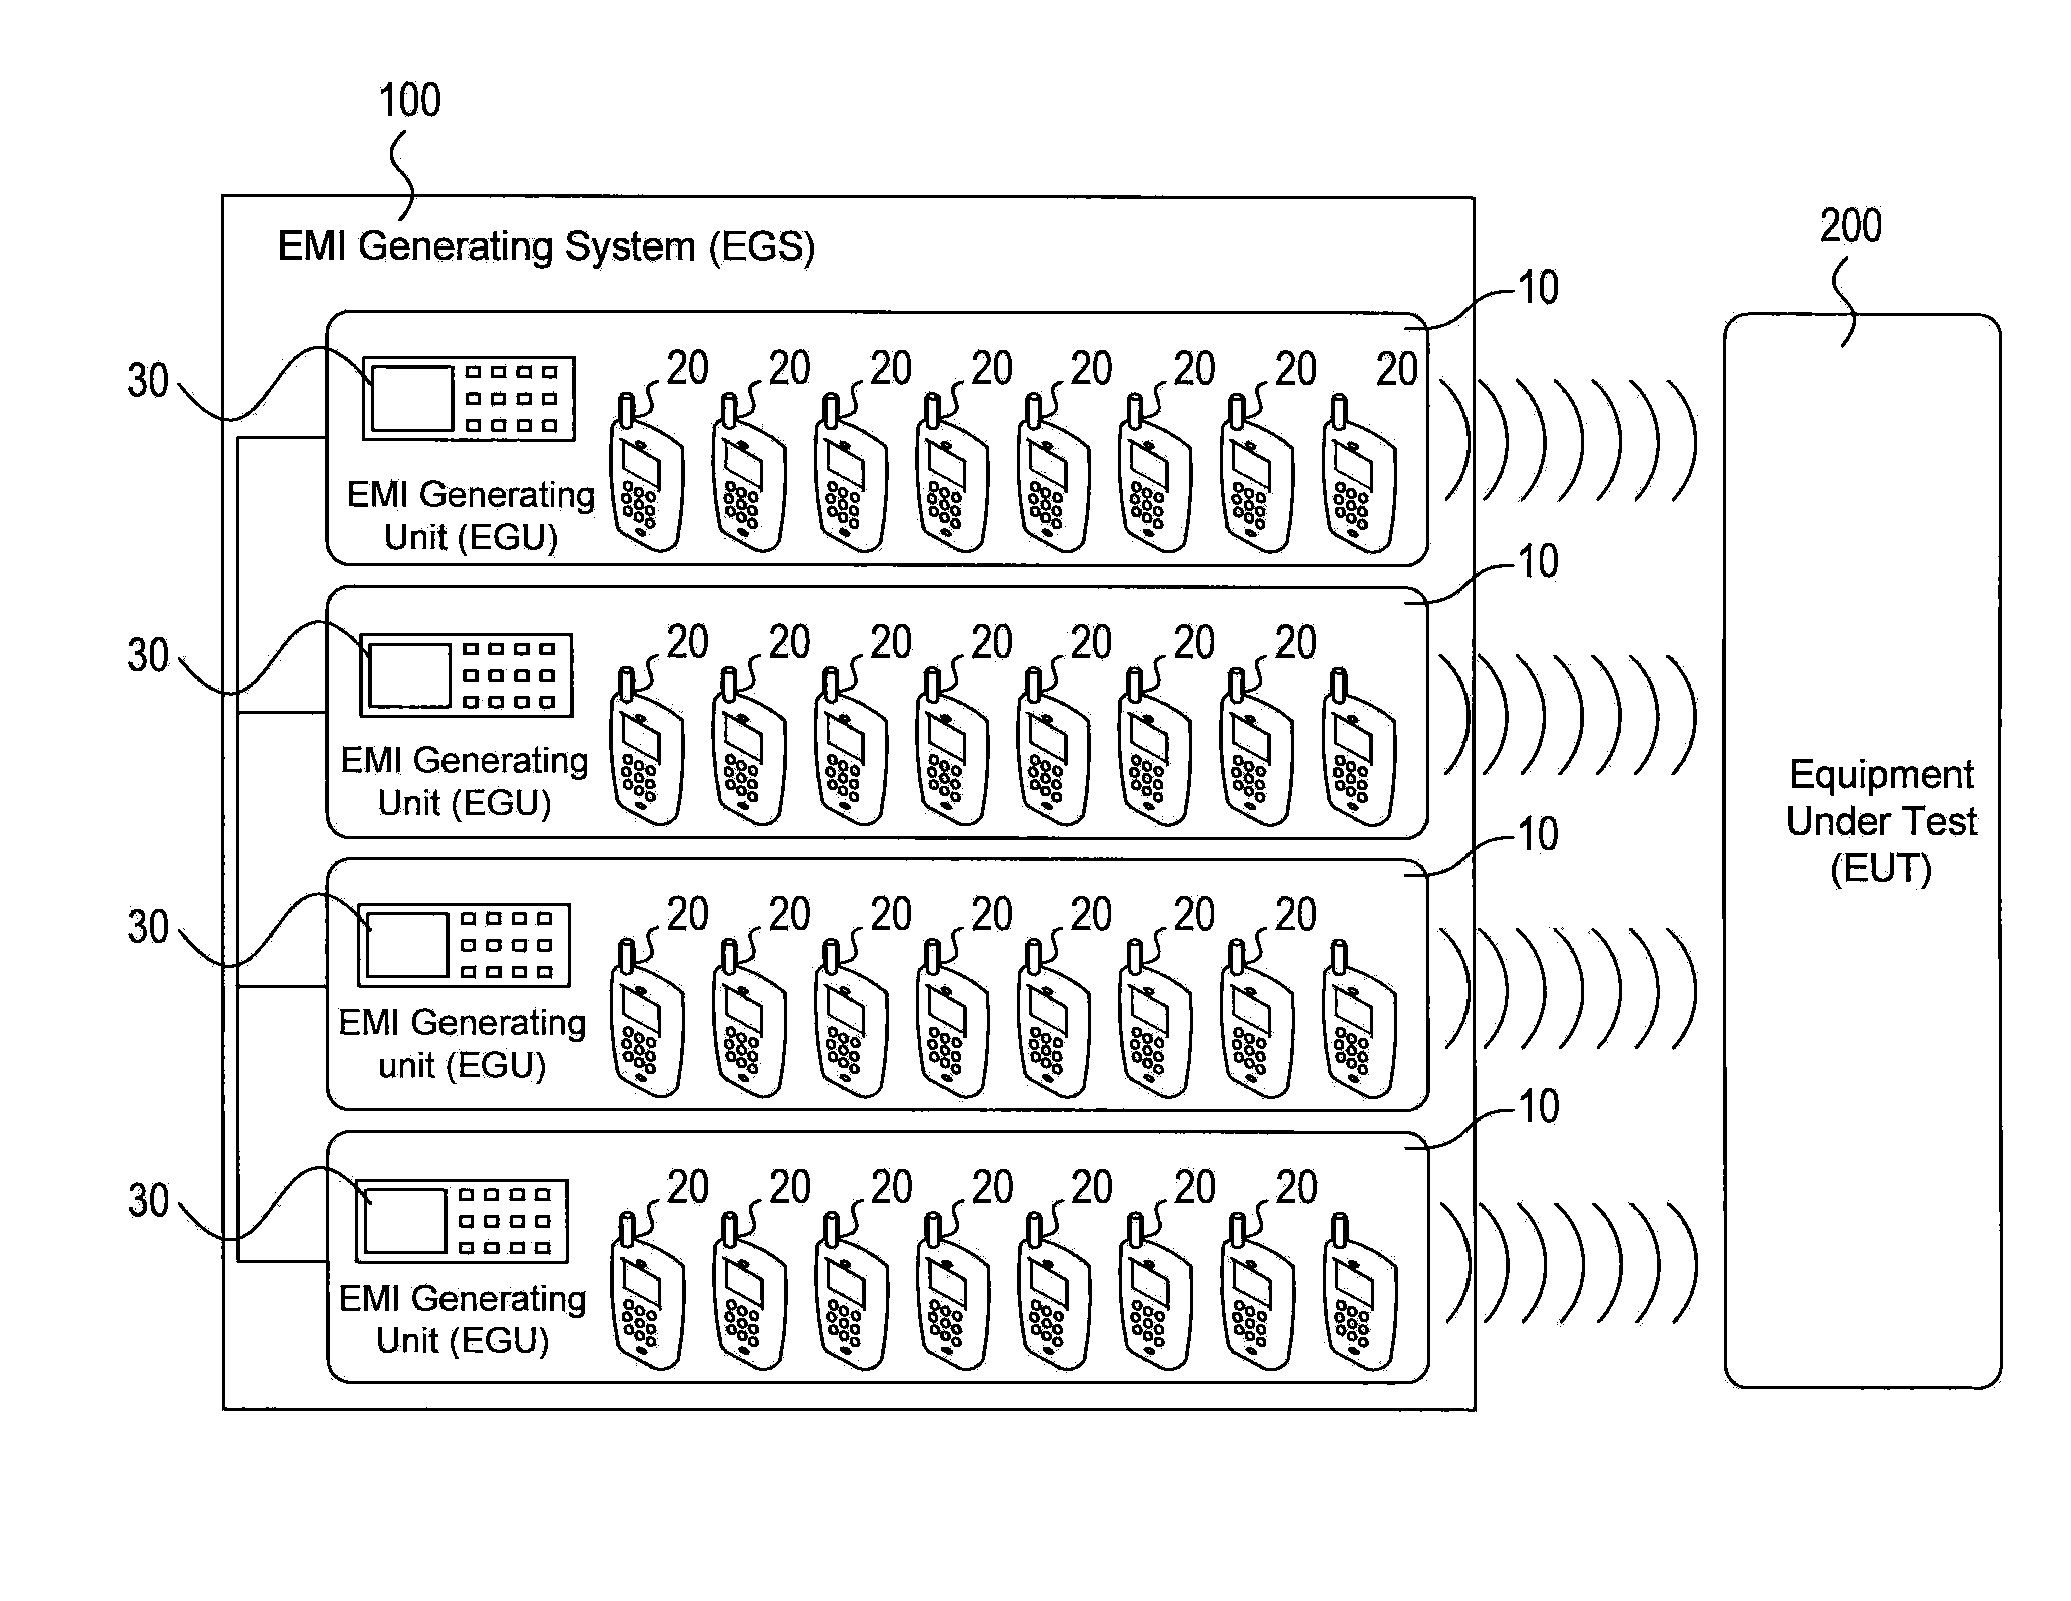 Systems and methods for conducting EMI susceptibility testing